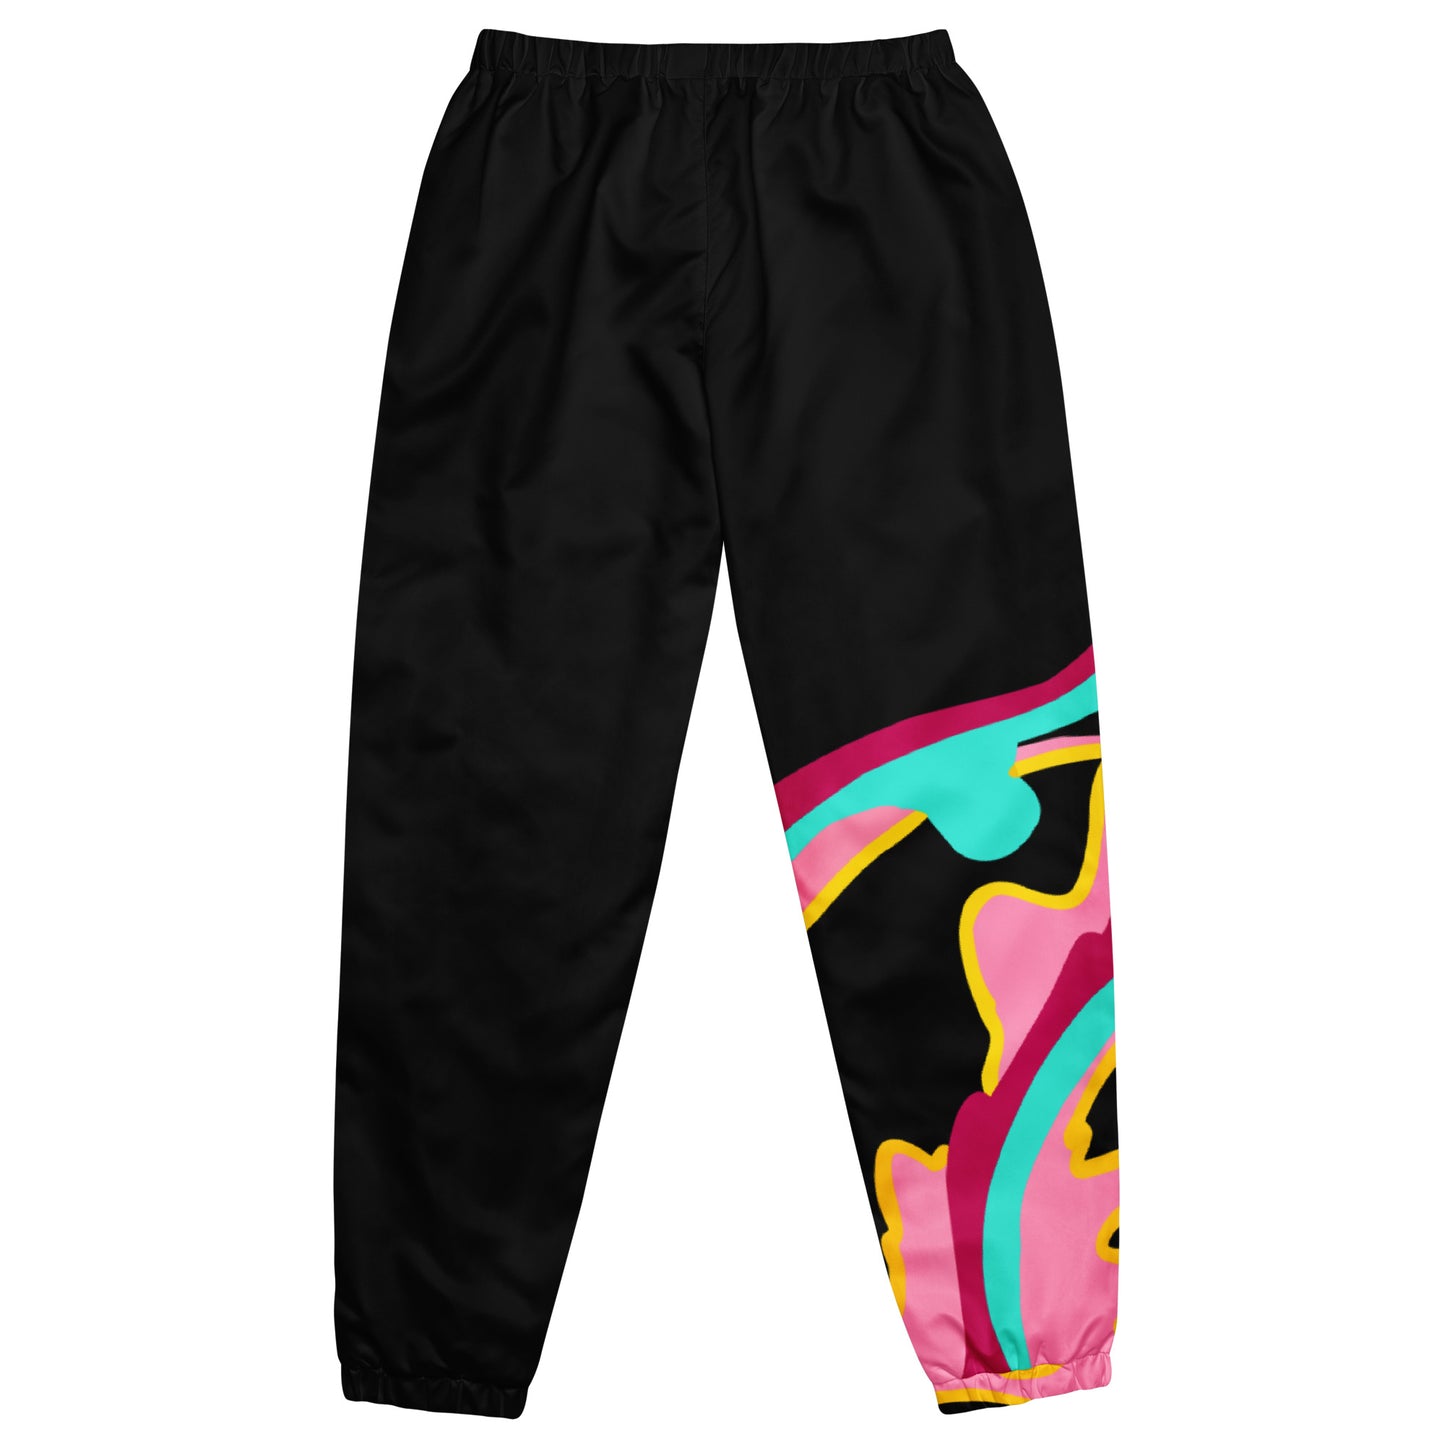 Body Love "New Classic" Track pants- Genderless, Mesh-lined.